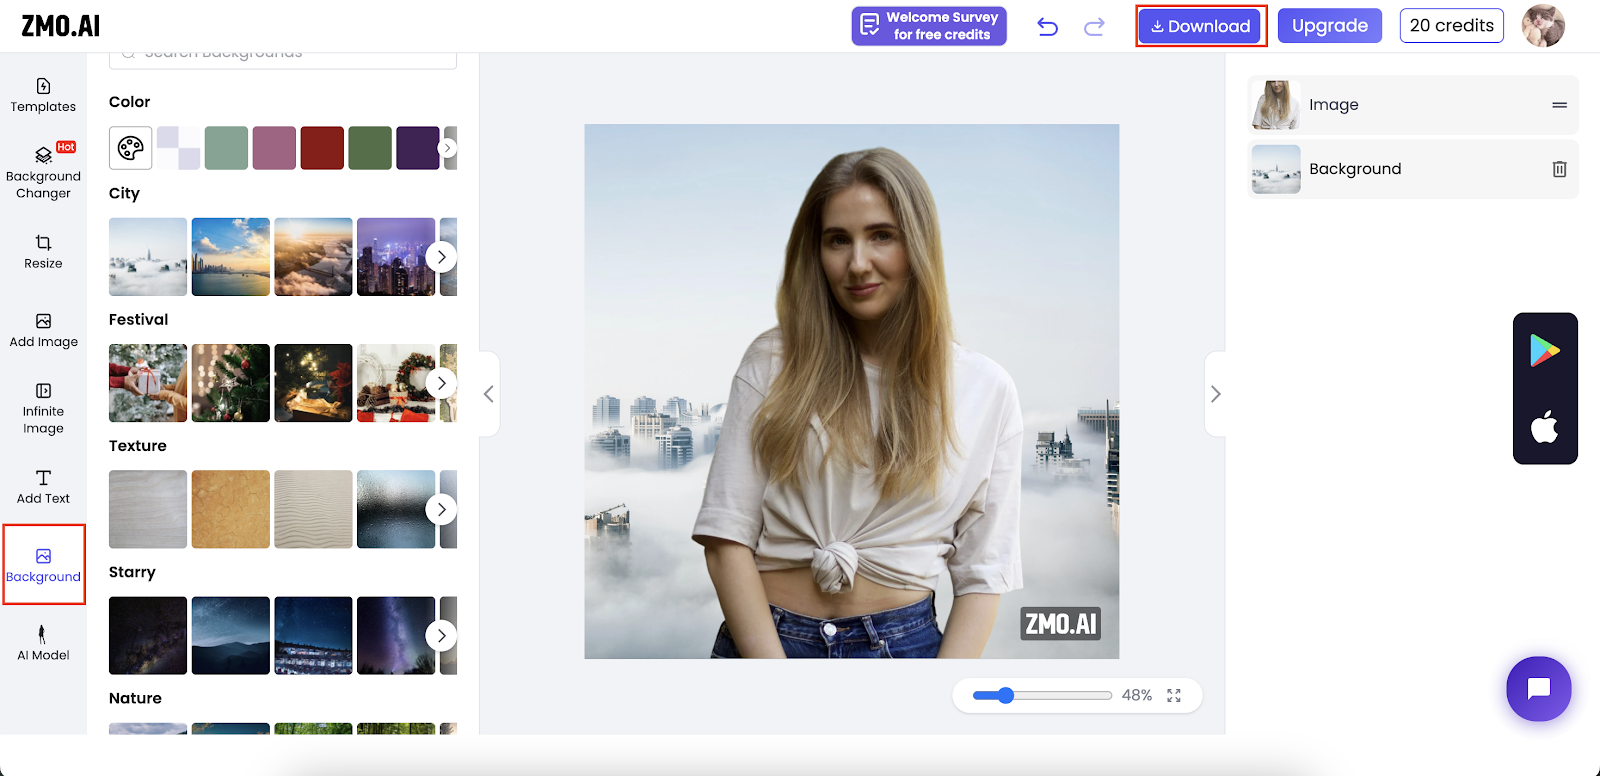 removing picture background on zmo.ai